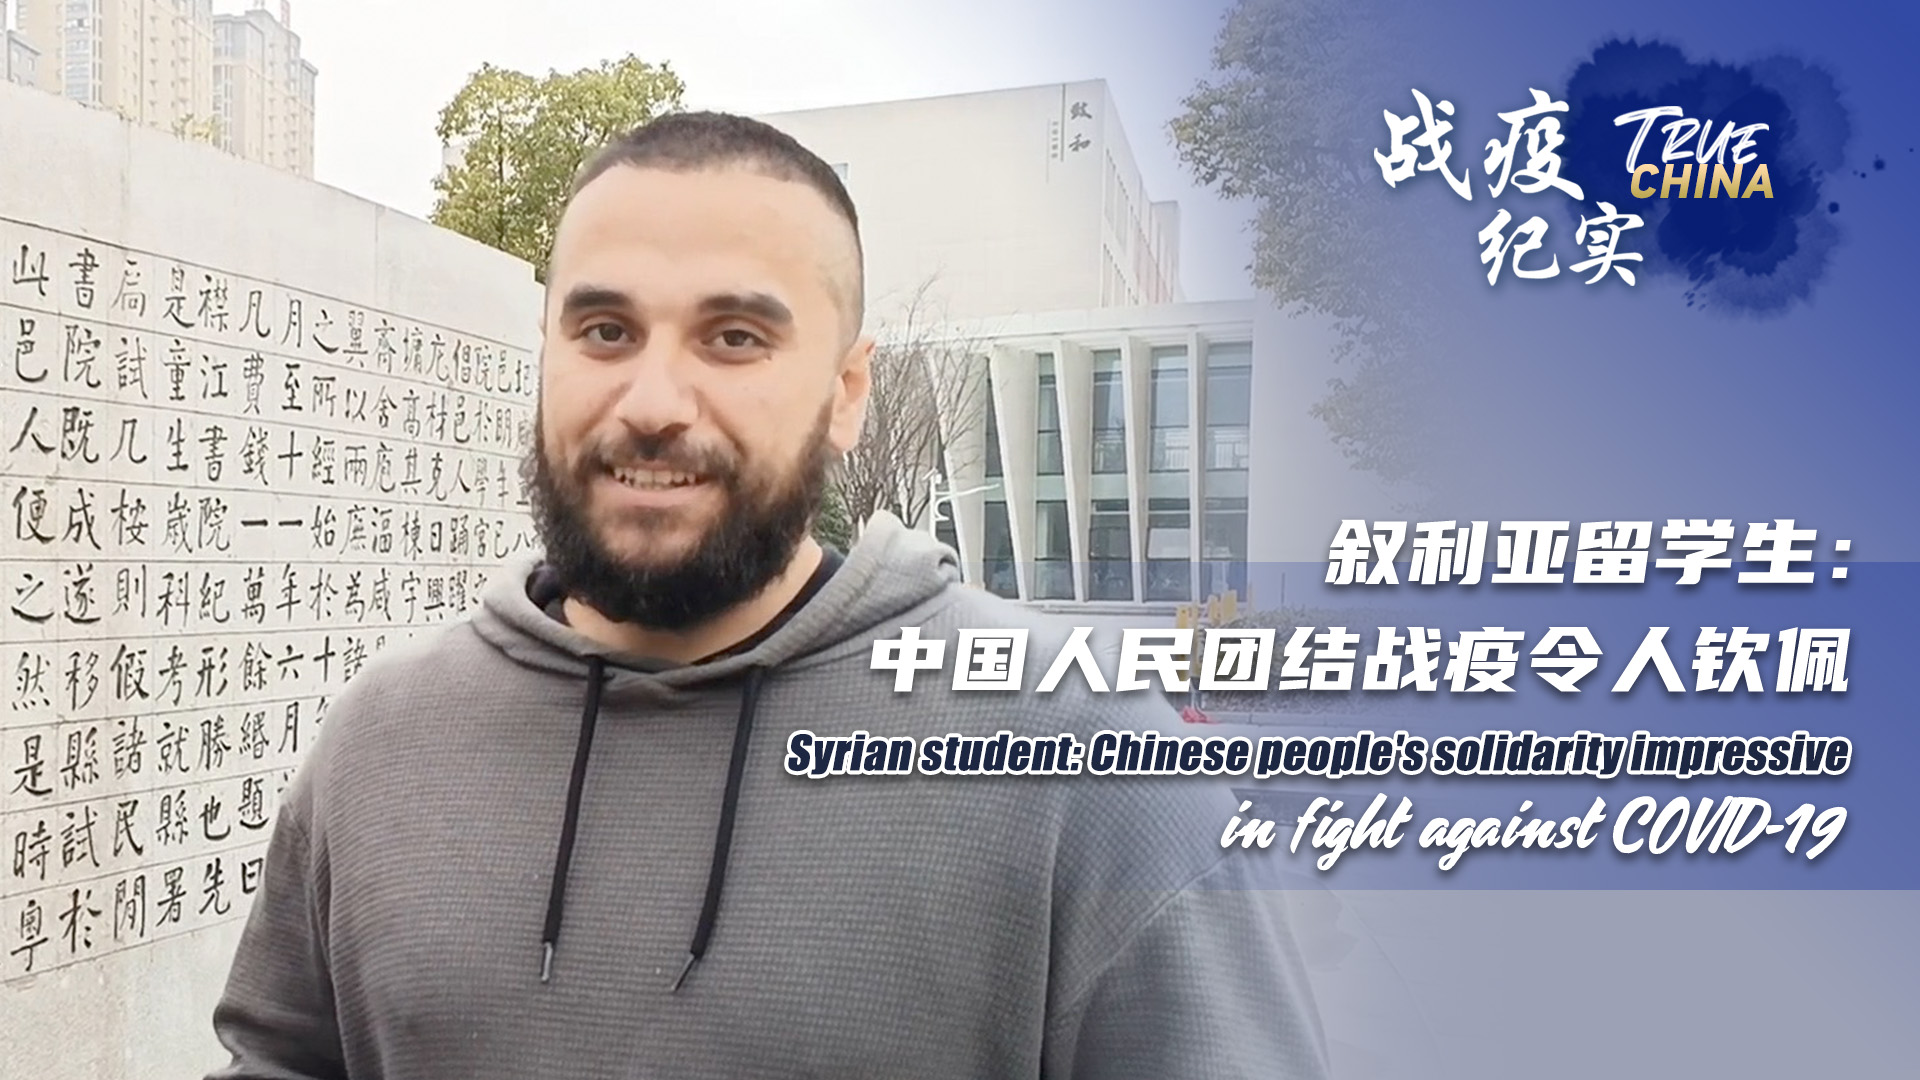 Syrian student impressed by Chinese people's solidarity in COVID fight